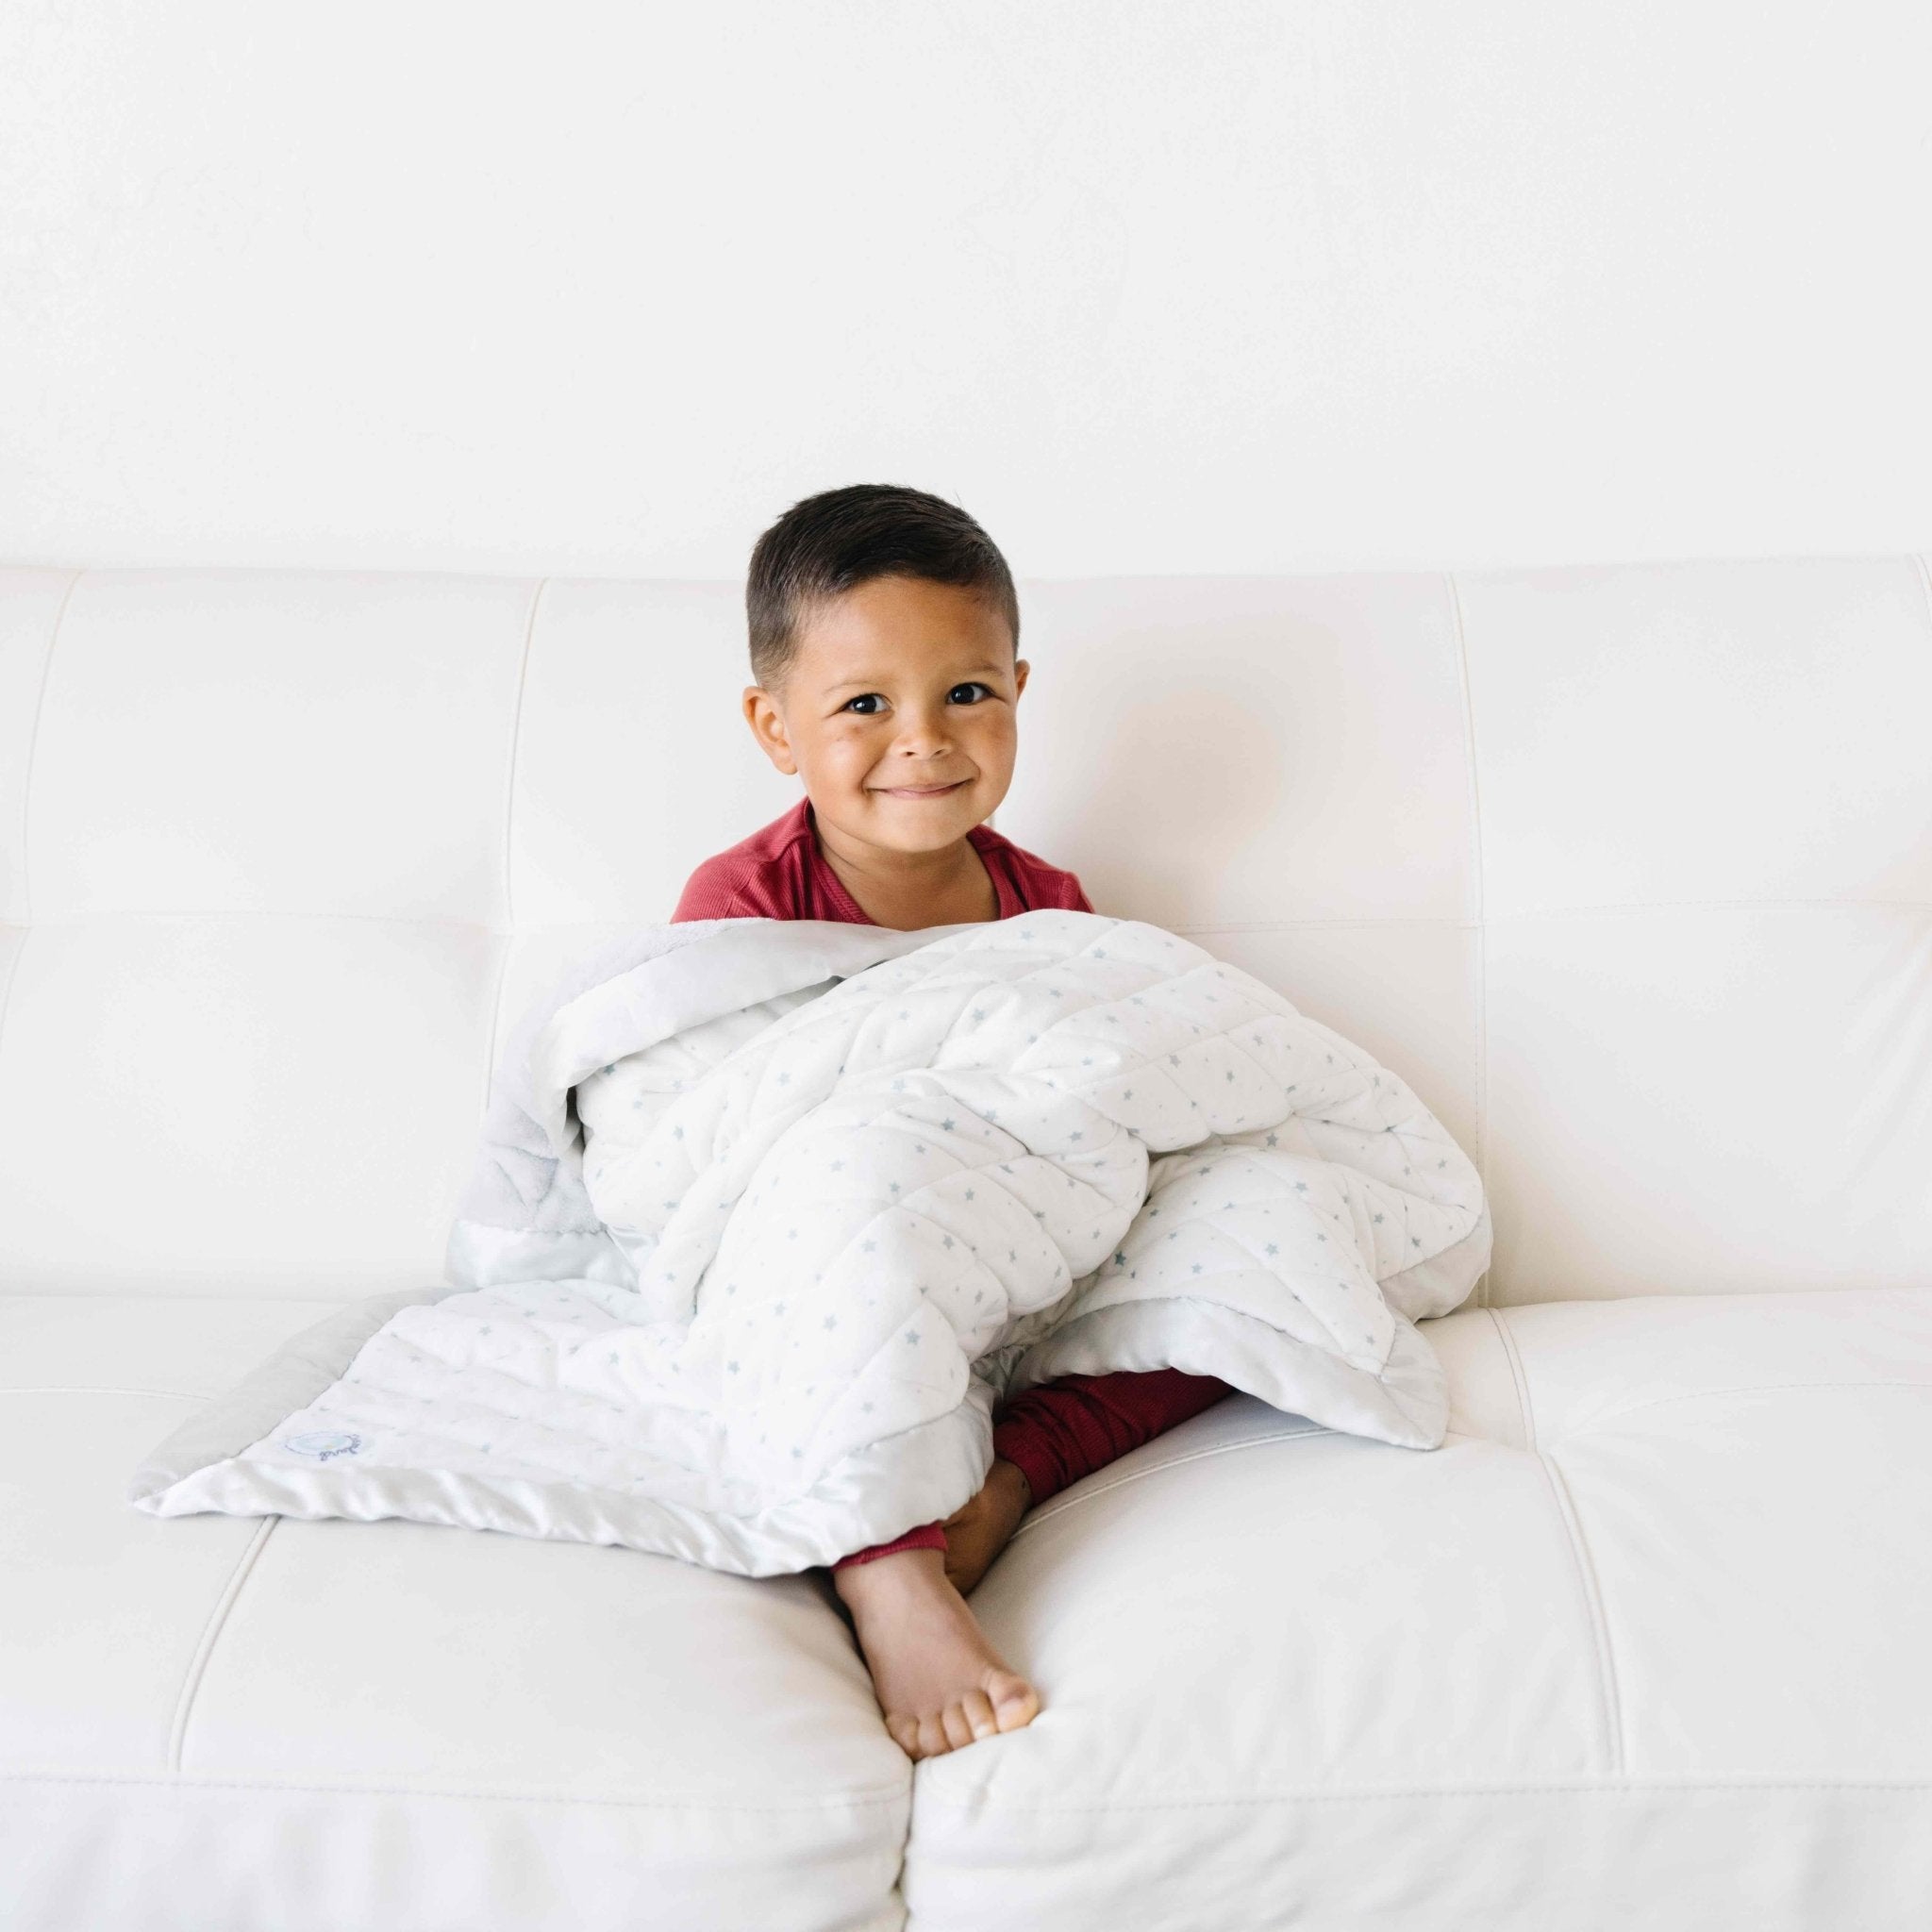 You can add weight to these adjustable weighted blankets as your child grows